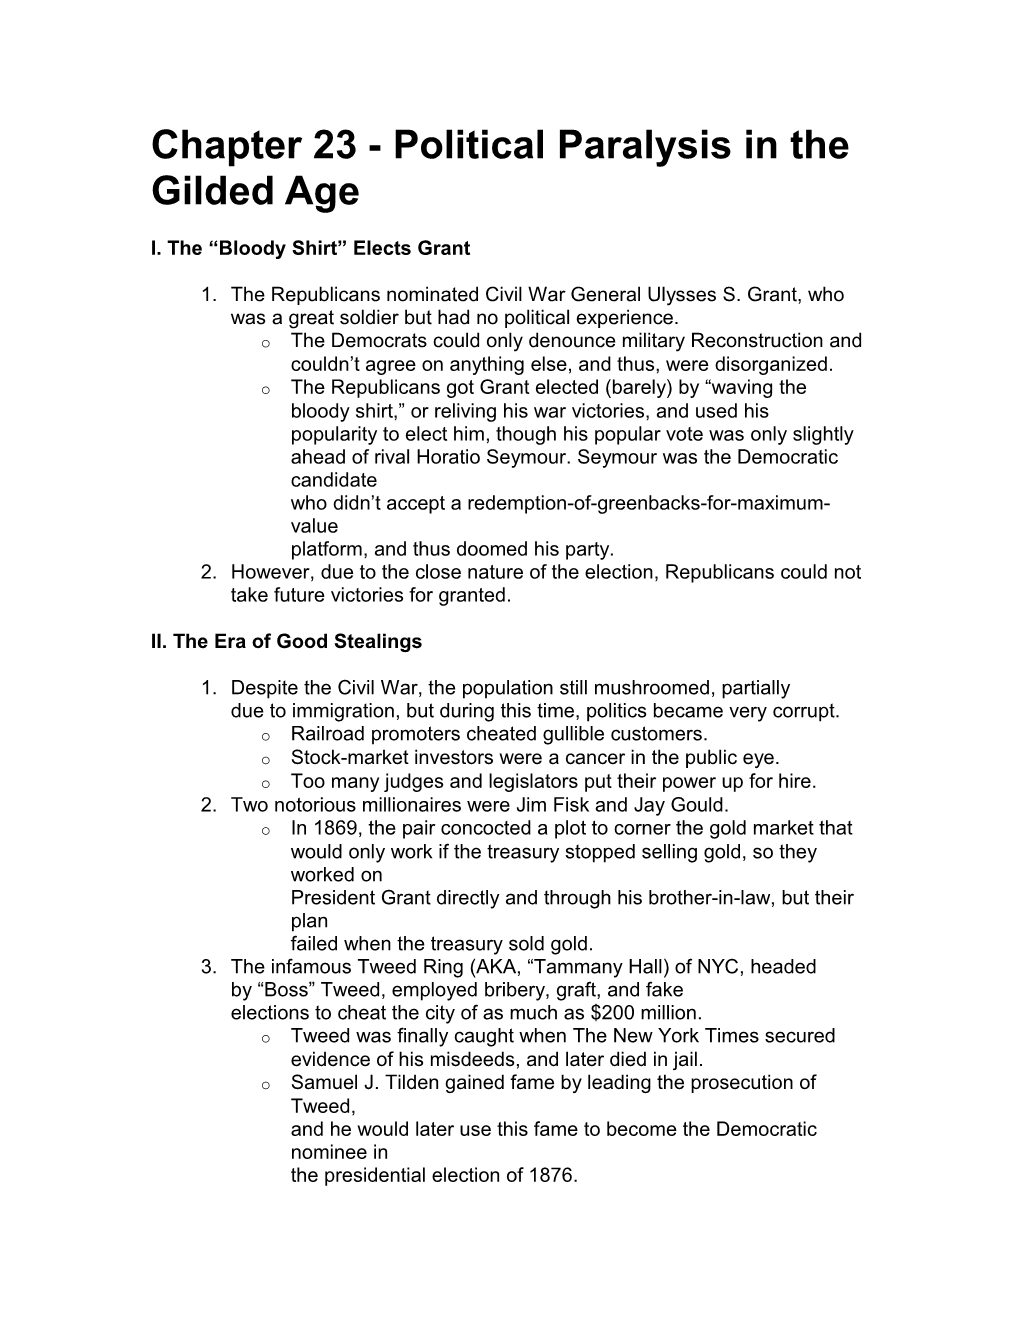 Chapter 23 - Political Paralysis in the Gilded Age